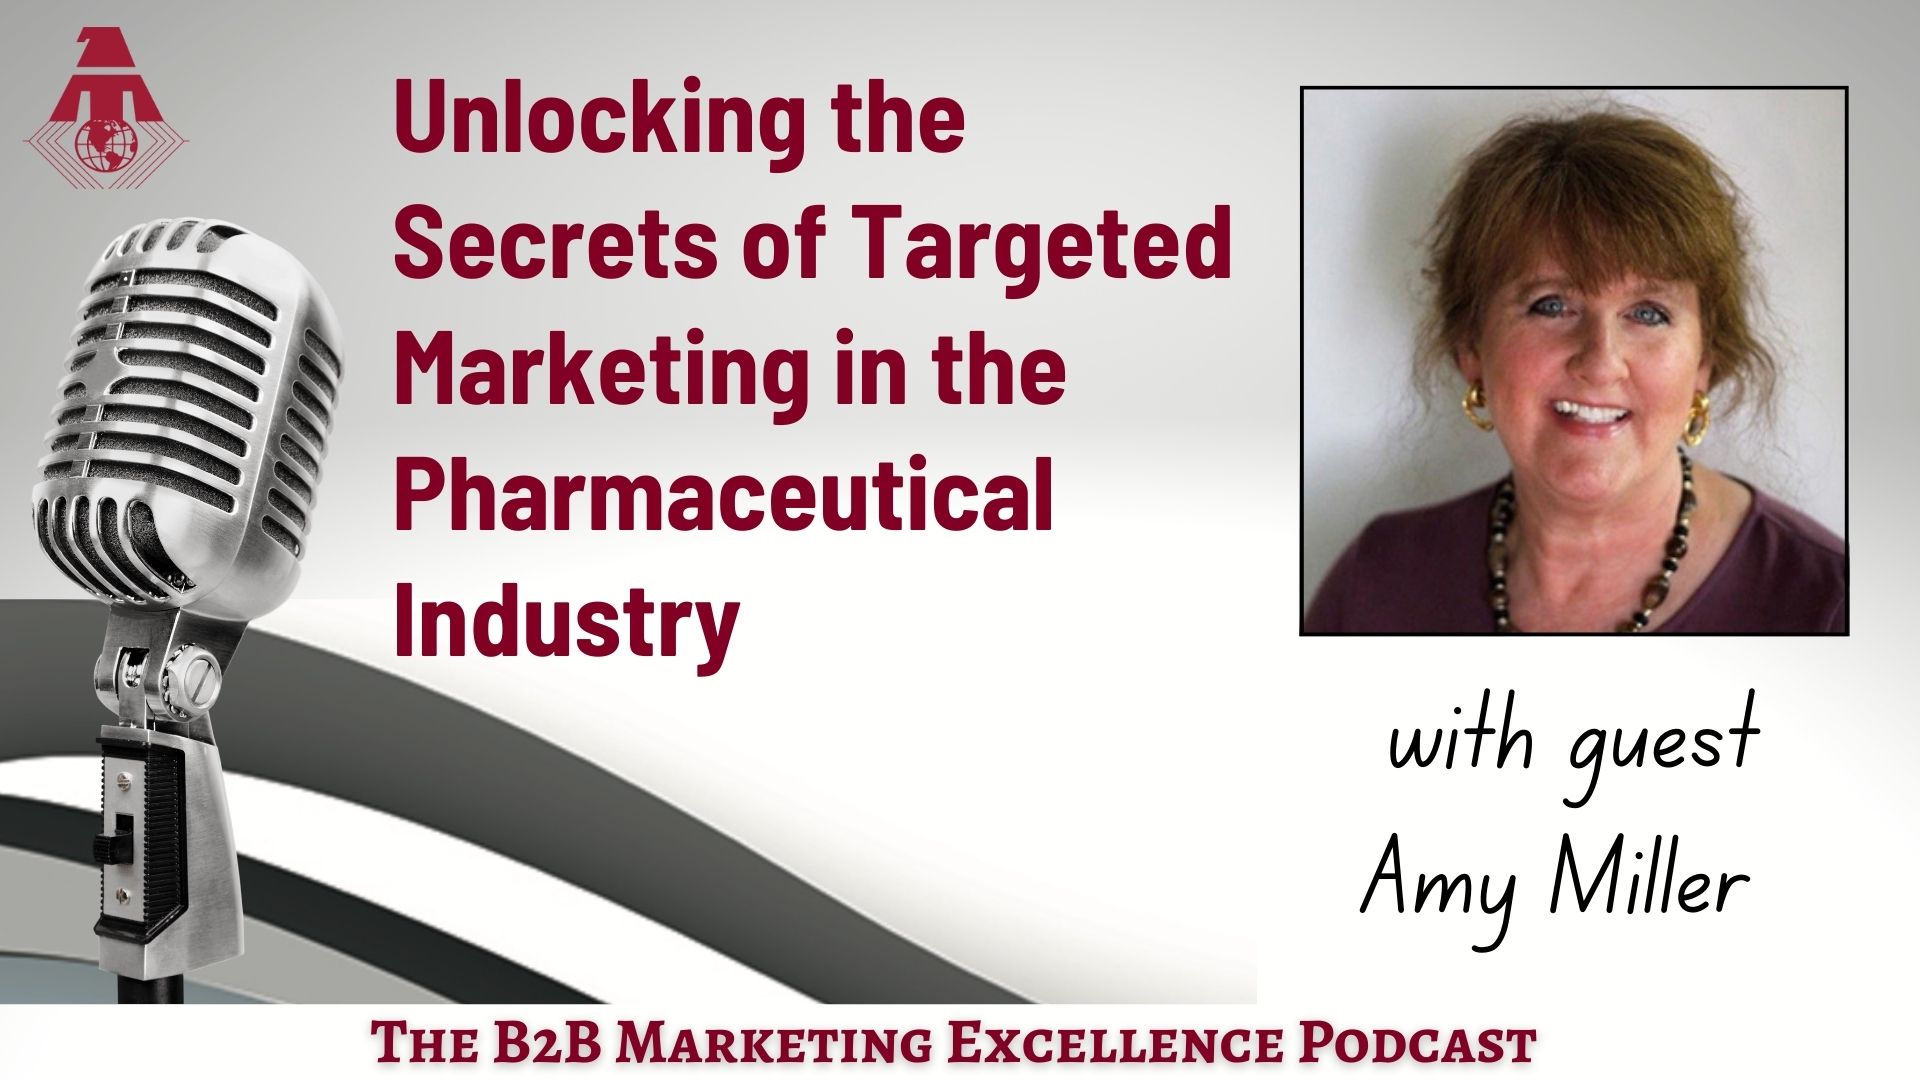 Podcast – Unlocking the Secrets of Targeted Marketing in the Pharmaceutical Industry